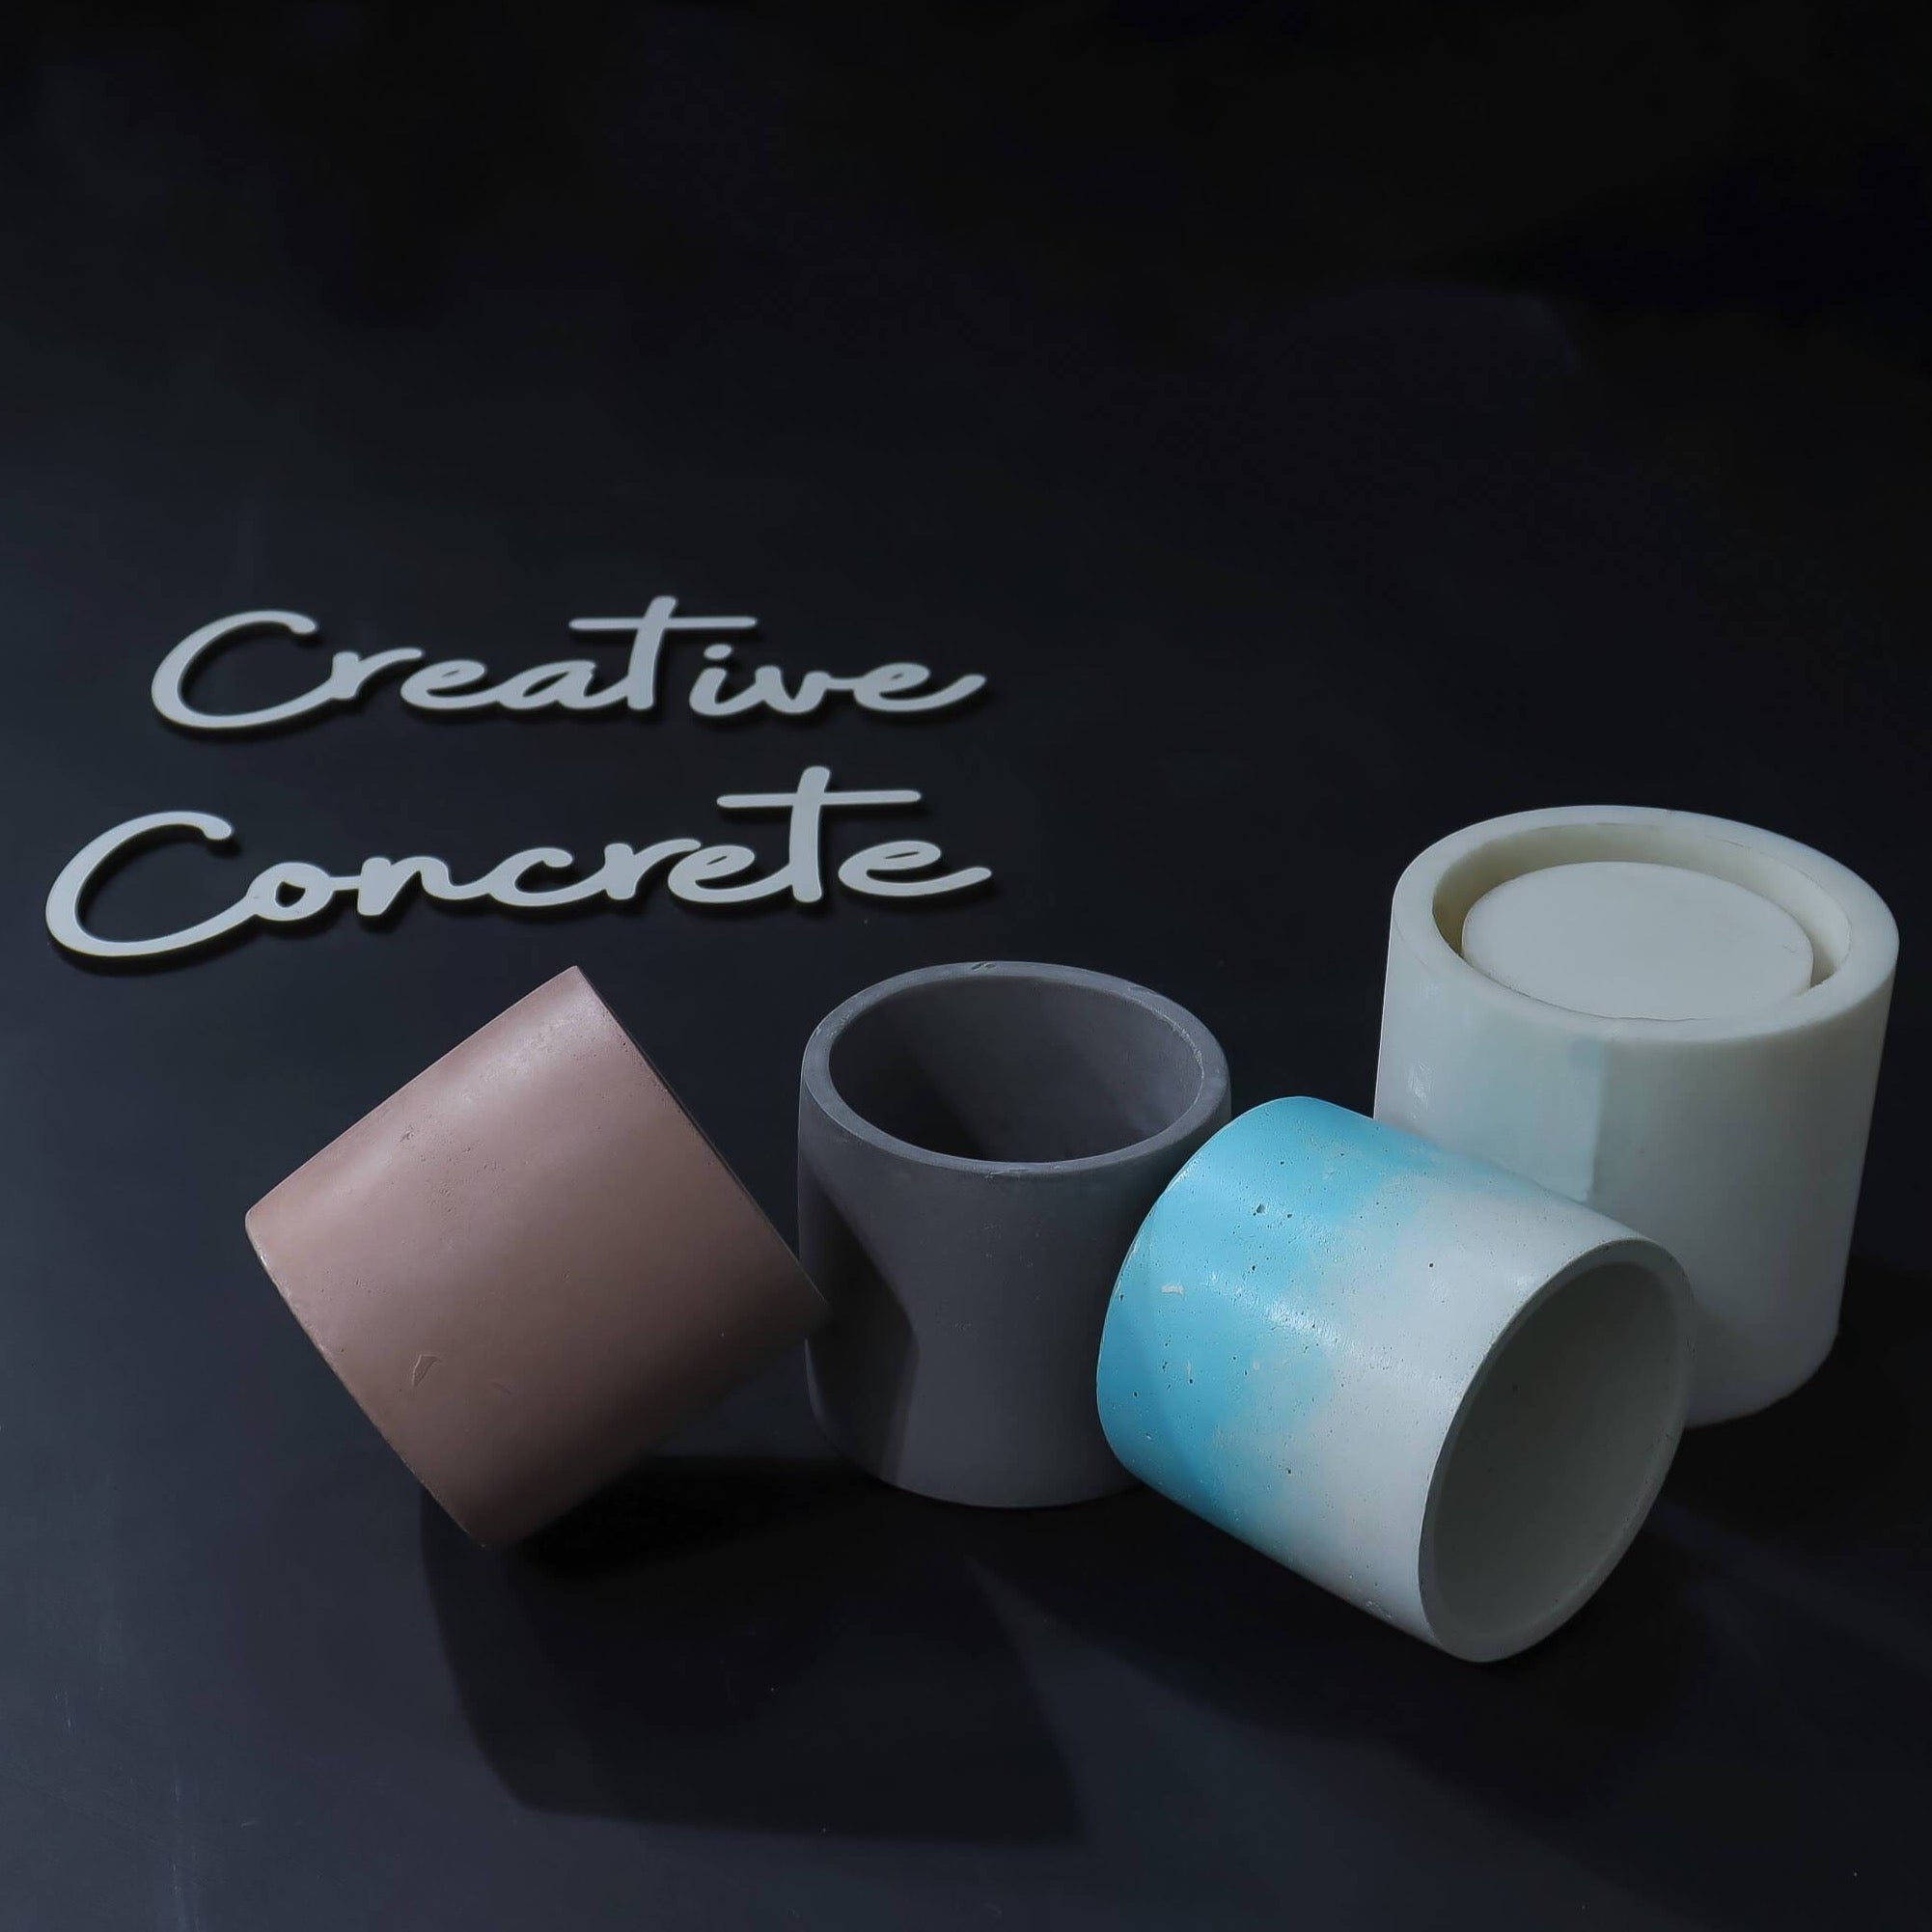 Creative Concrete's Mold for Planter or Candle vessel - CL-003-Eliteearth